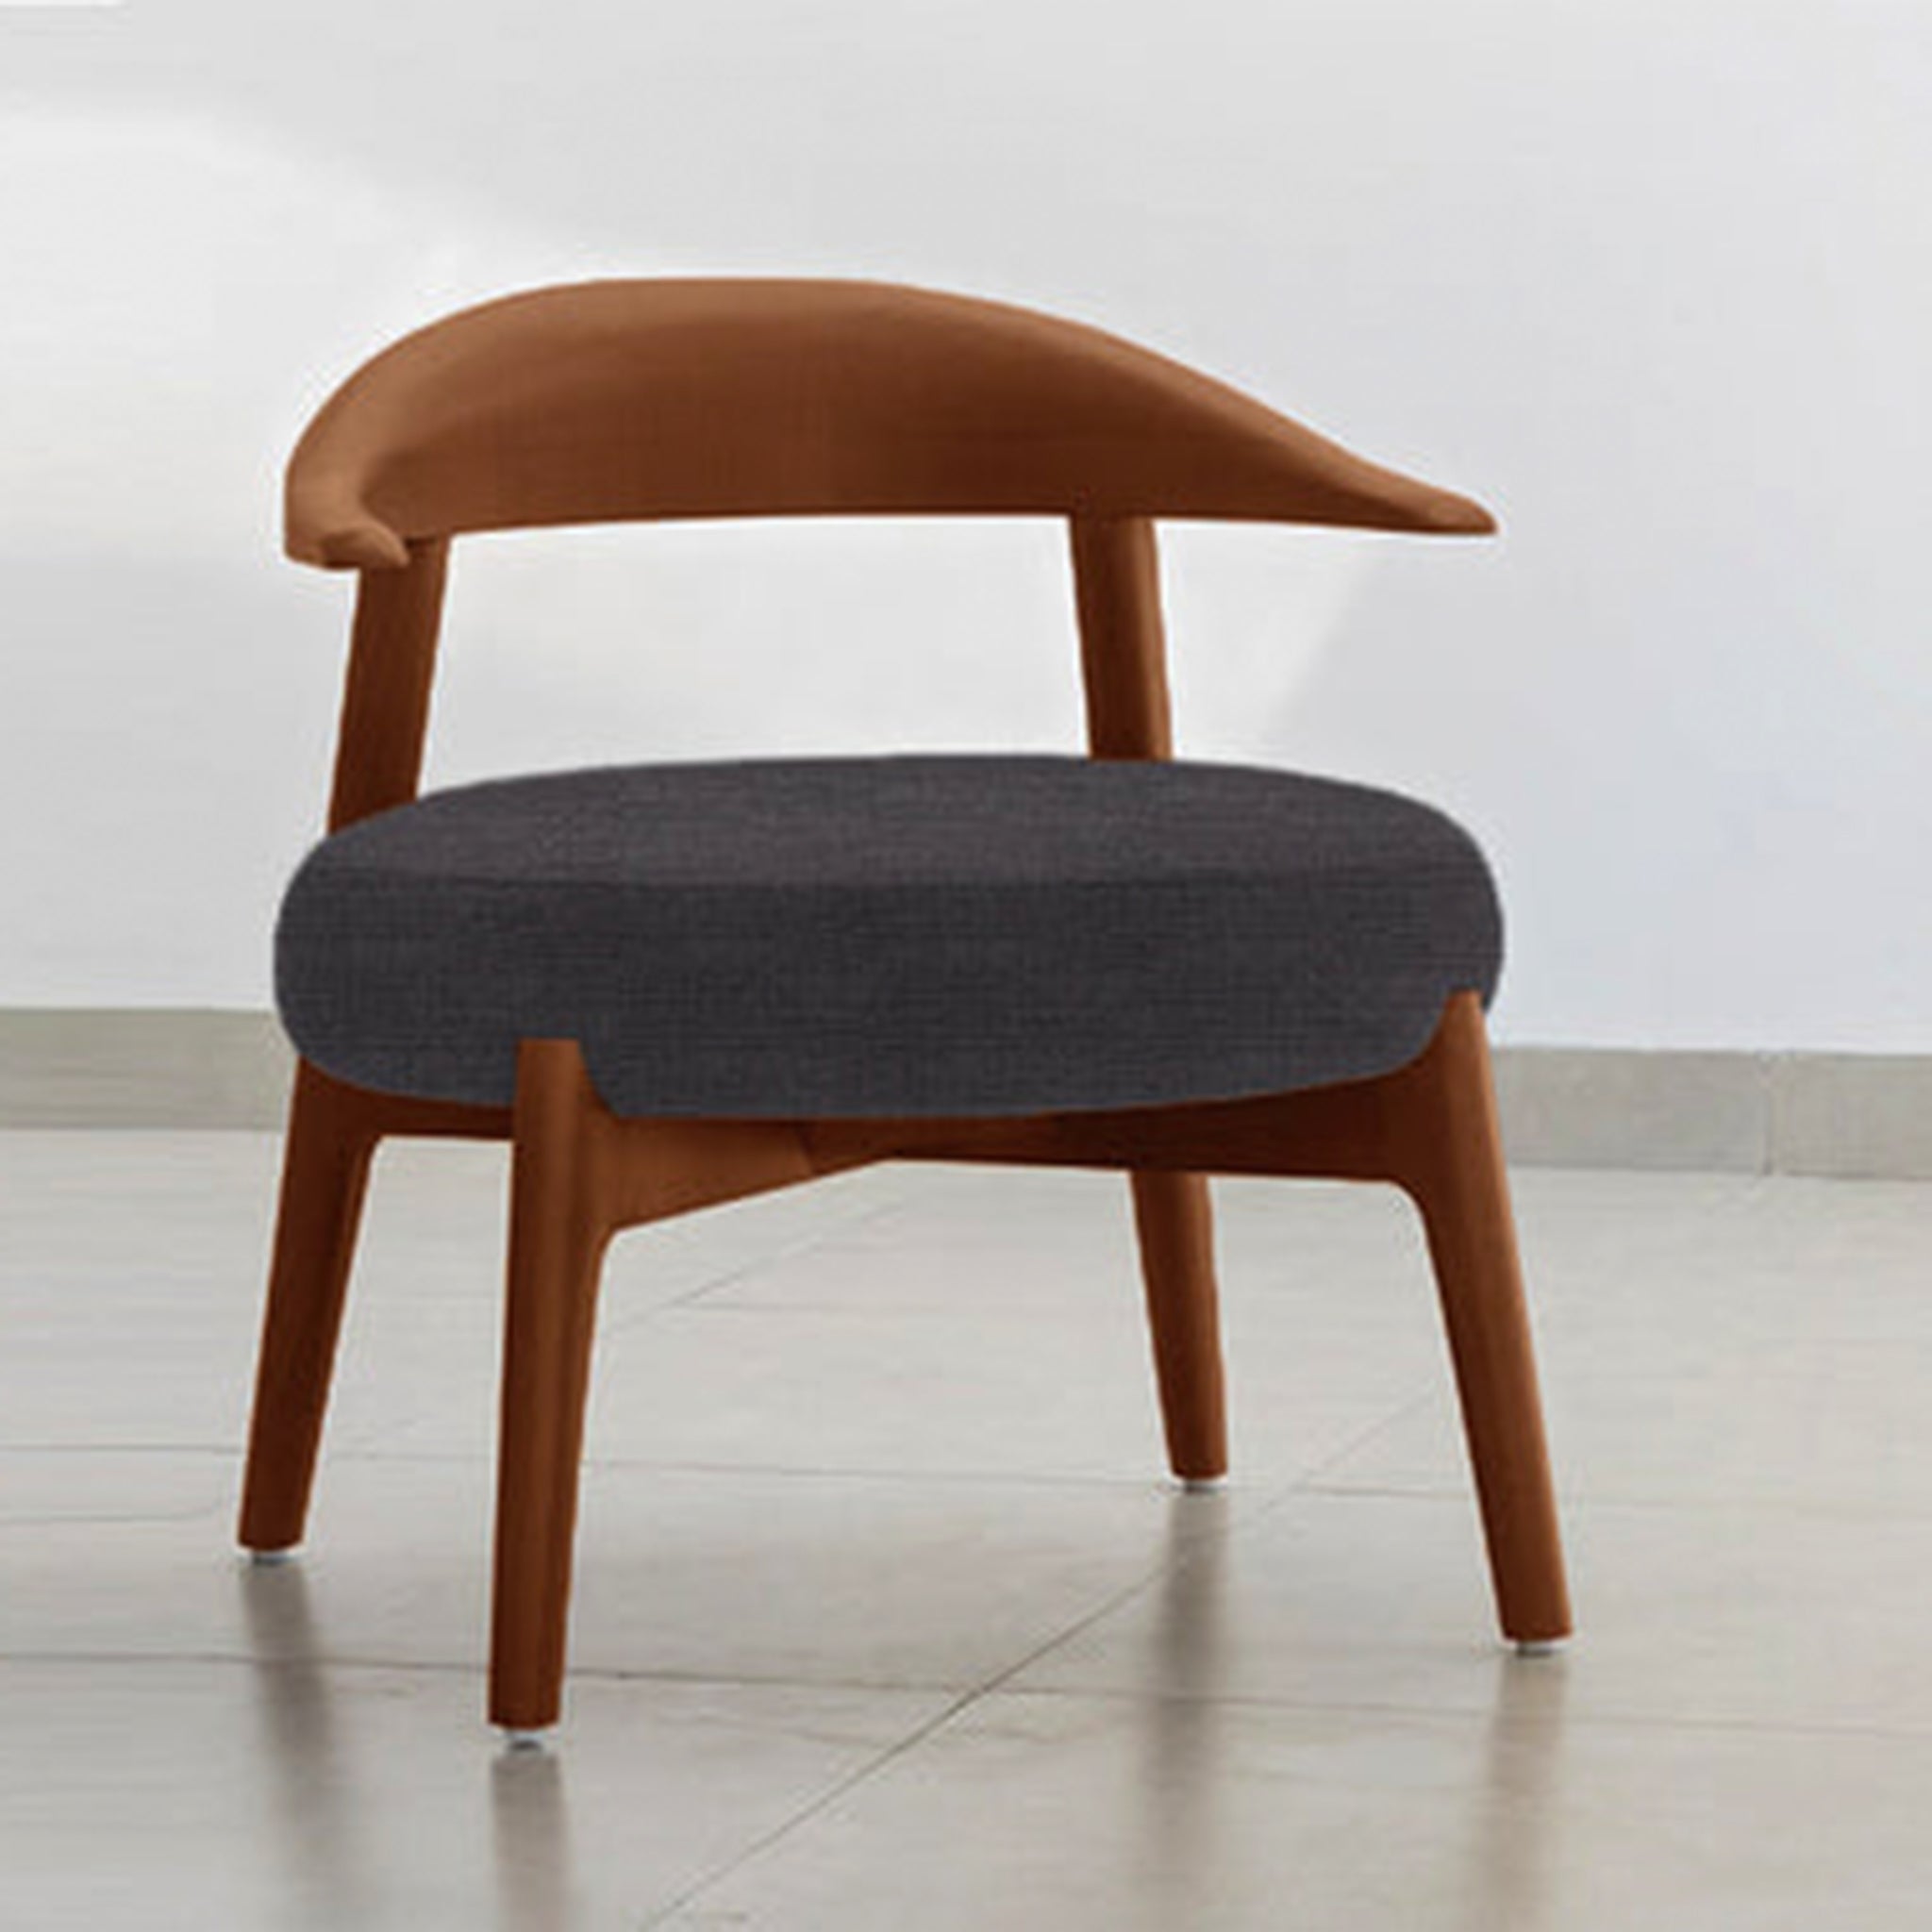 "The Hyde Accent Chair with sleek wooden frame and plush blue seat"